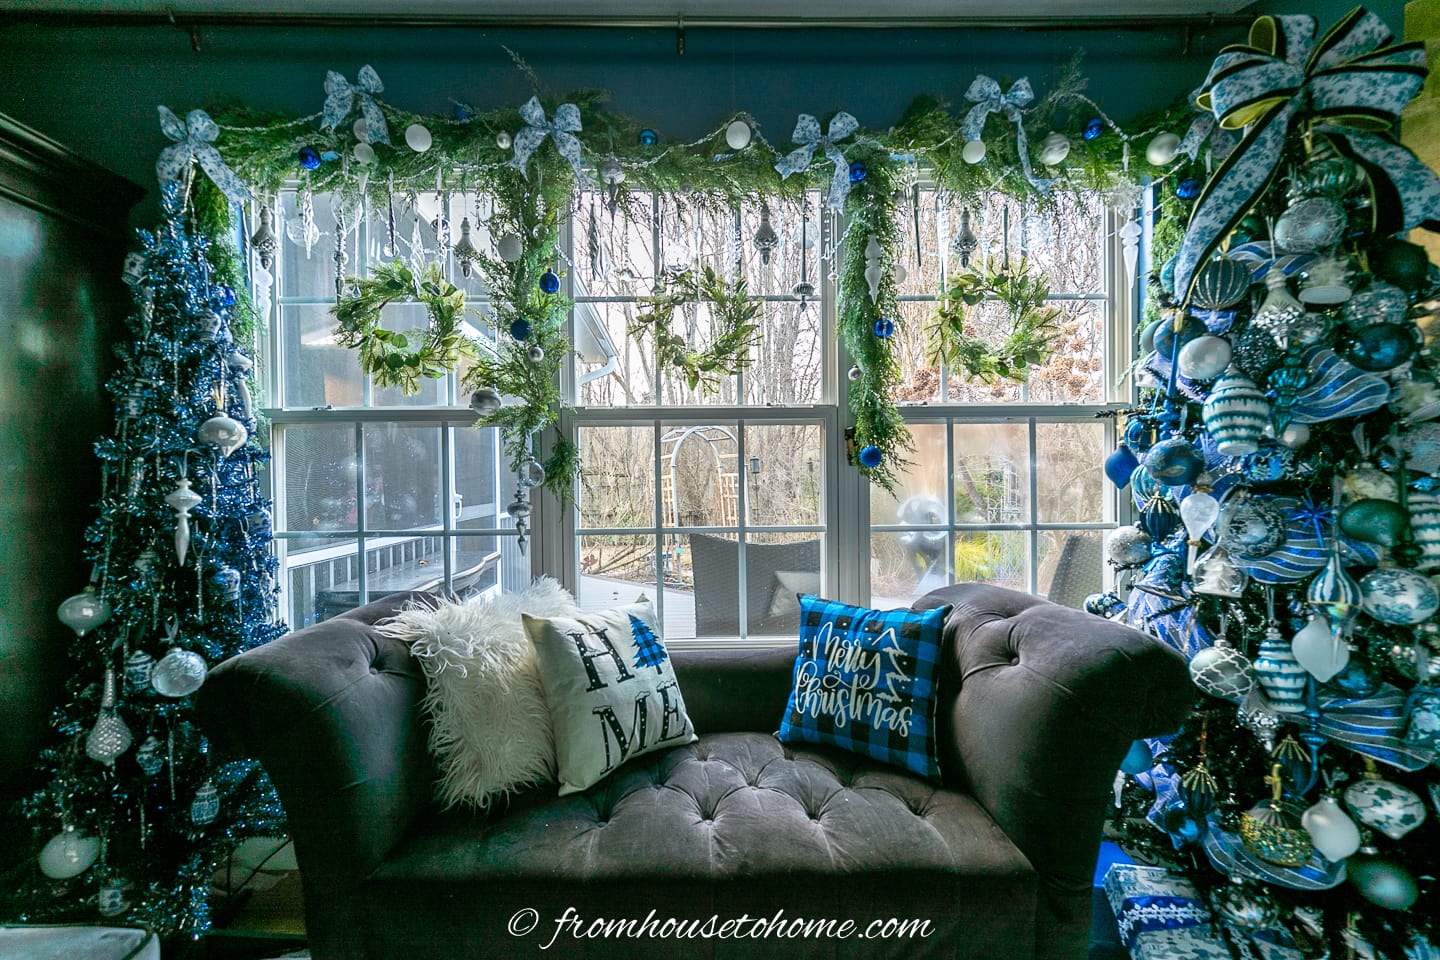 blue and white garland over a window